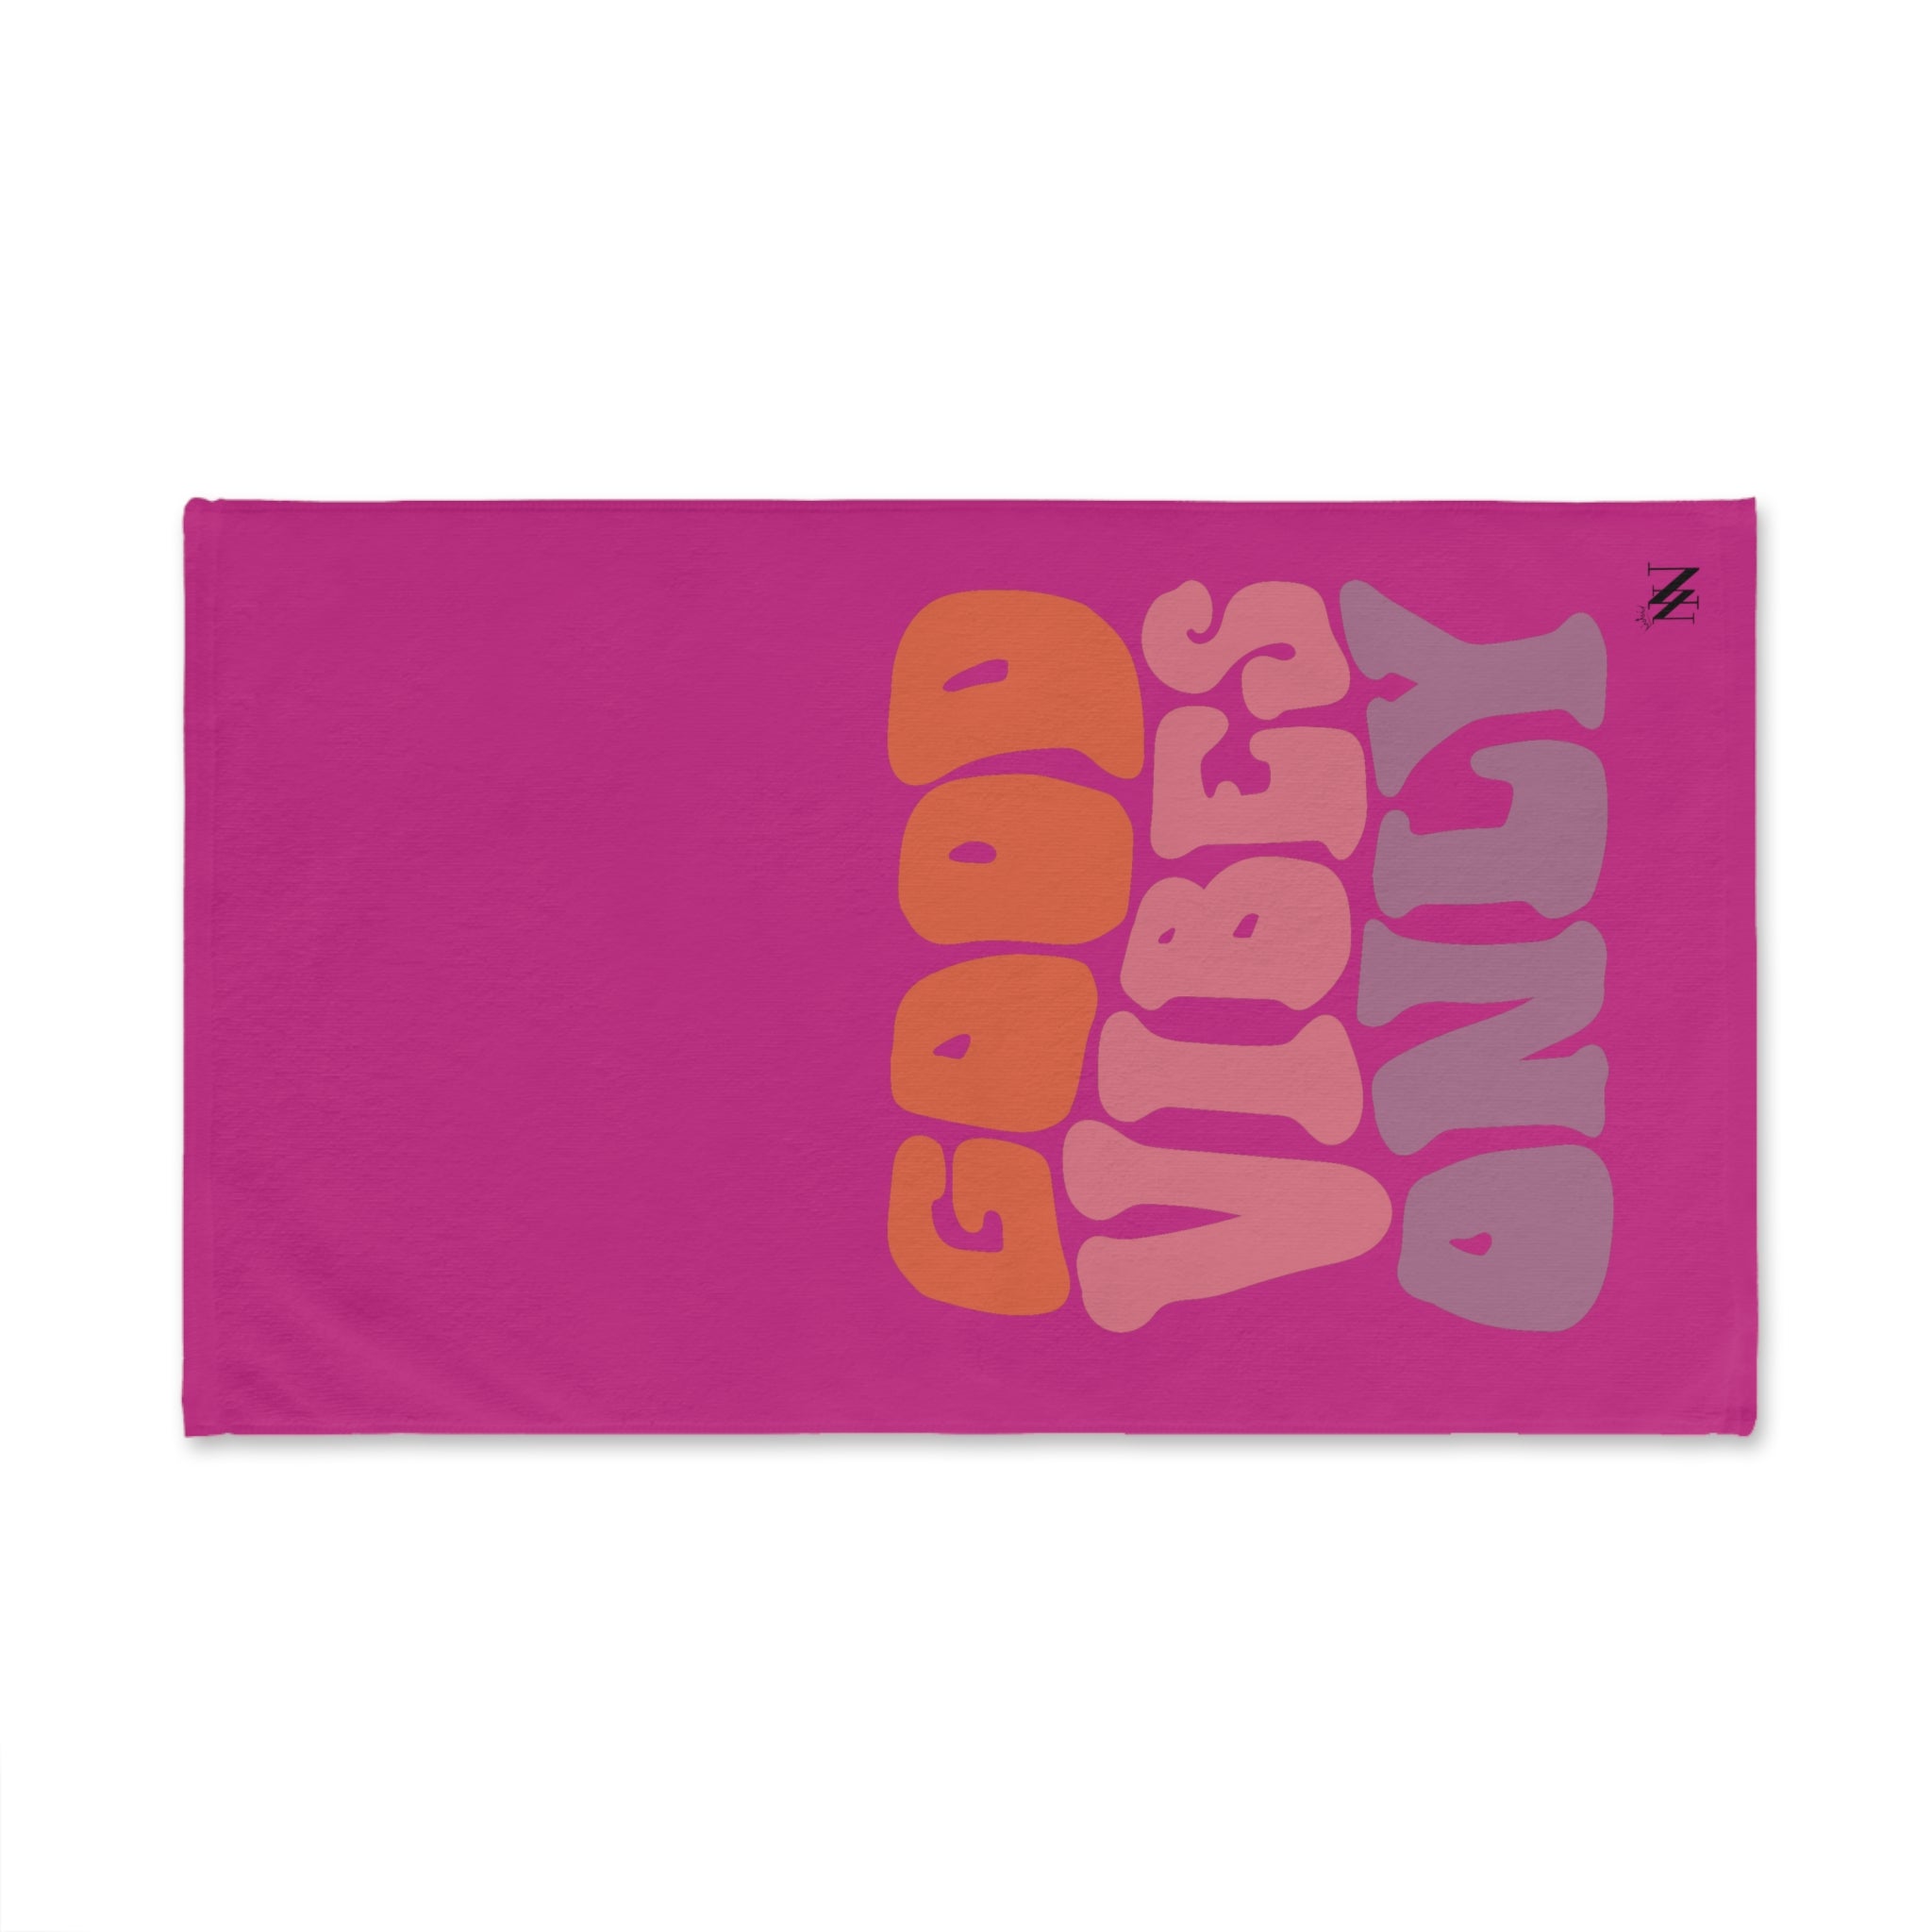 Only Vibes Good Fuscia | Funny Gifts for Men - Gifts for Him - Birthday Gifts for Men, Him, Husband, Boyfriend, New Couple Gifts, Fathers & Valentines Day Gifts, Hand Towels NECTAR NAPKINS